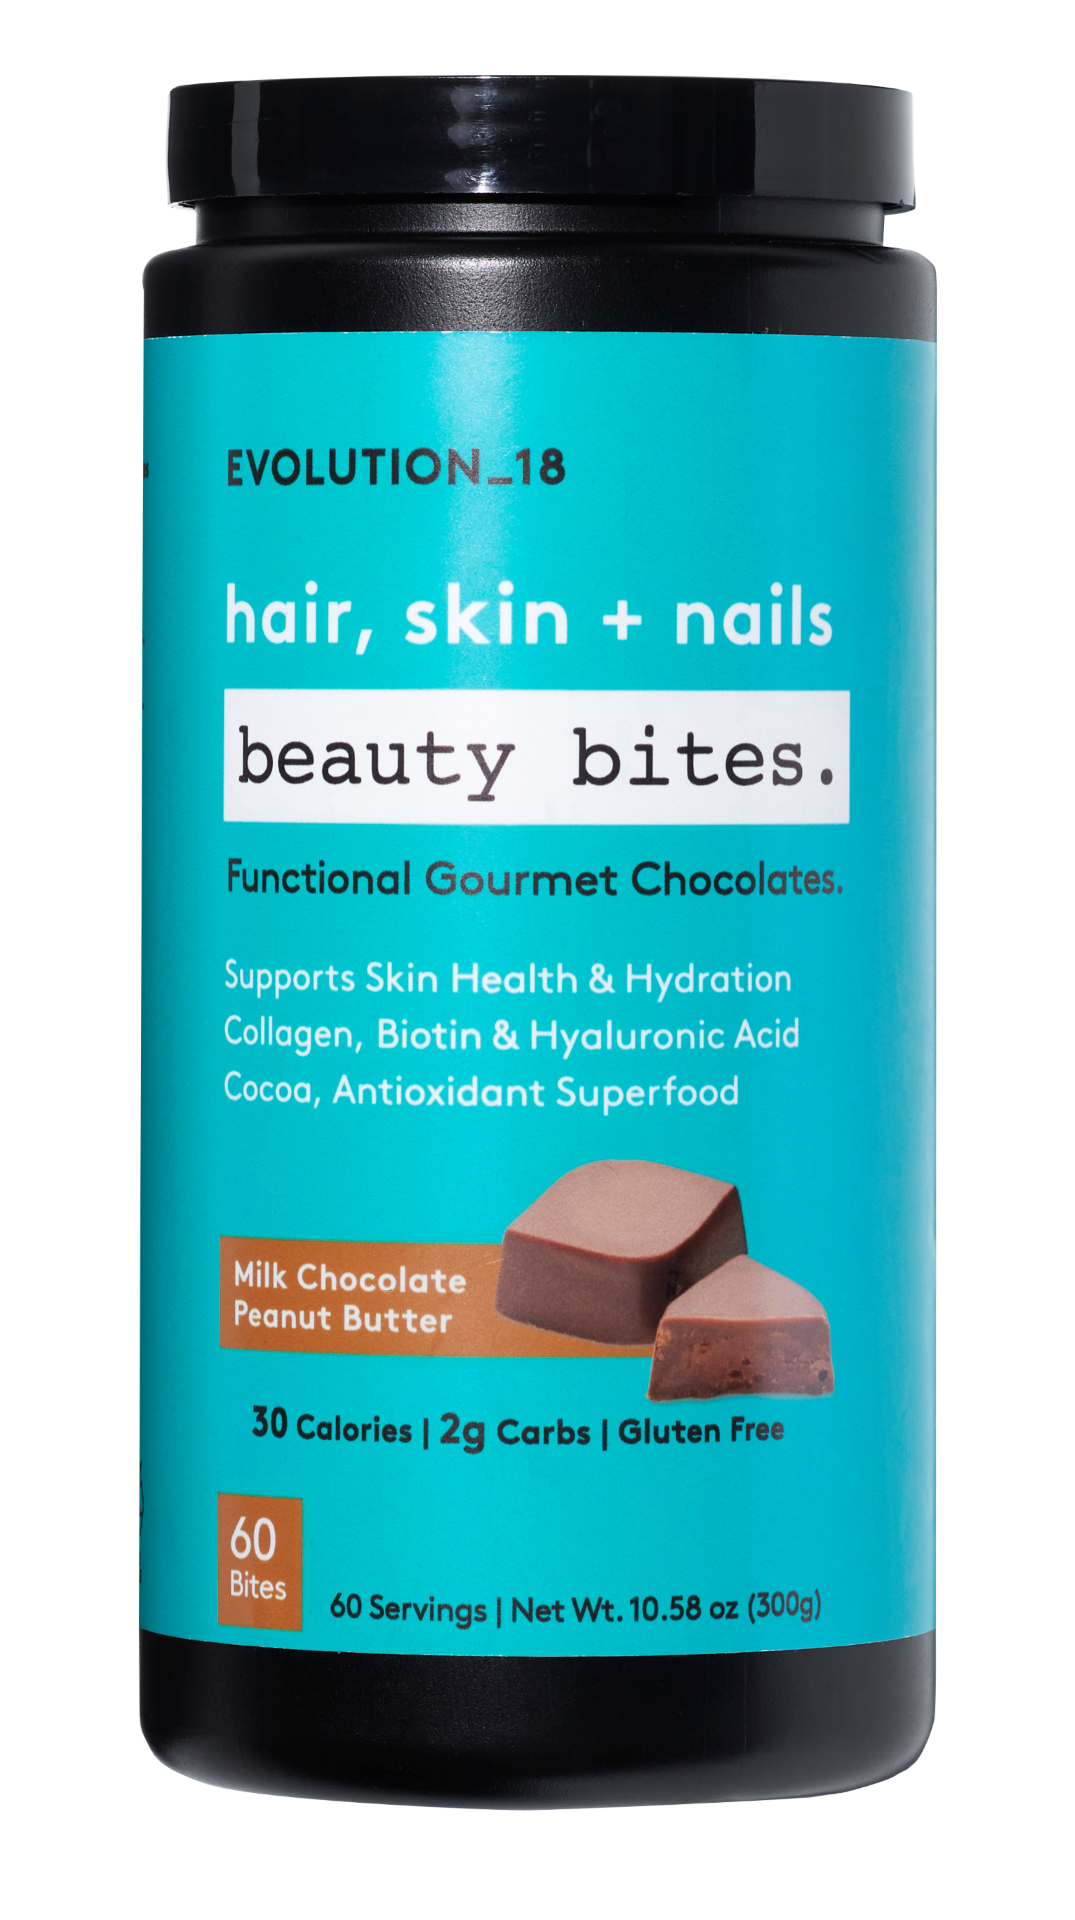 EVOLUTION_18 Beauty Bites, Chocolate Peanut Butter, Functional Gourmet Chocolates, Collagen, Biotin, Hyaluronic Acid, for Hair, Skin & Nails, 30 Calories, 60 count - image 1 of 10